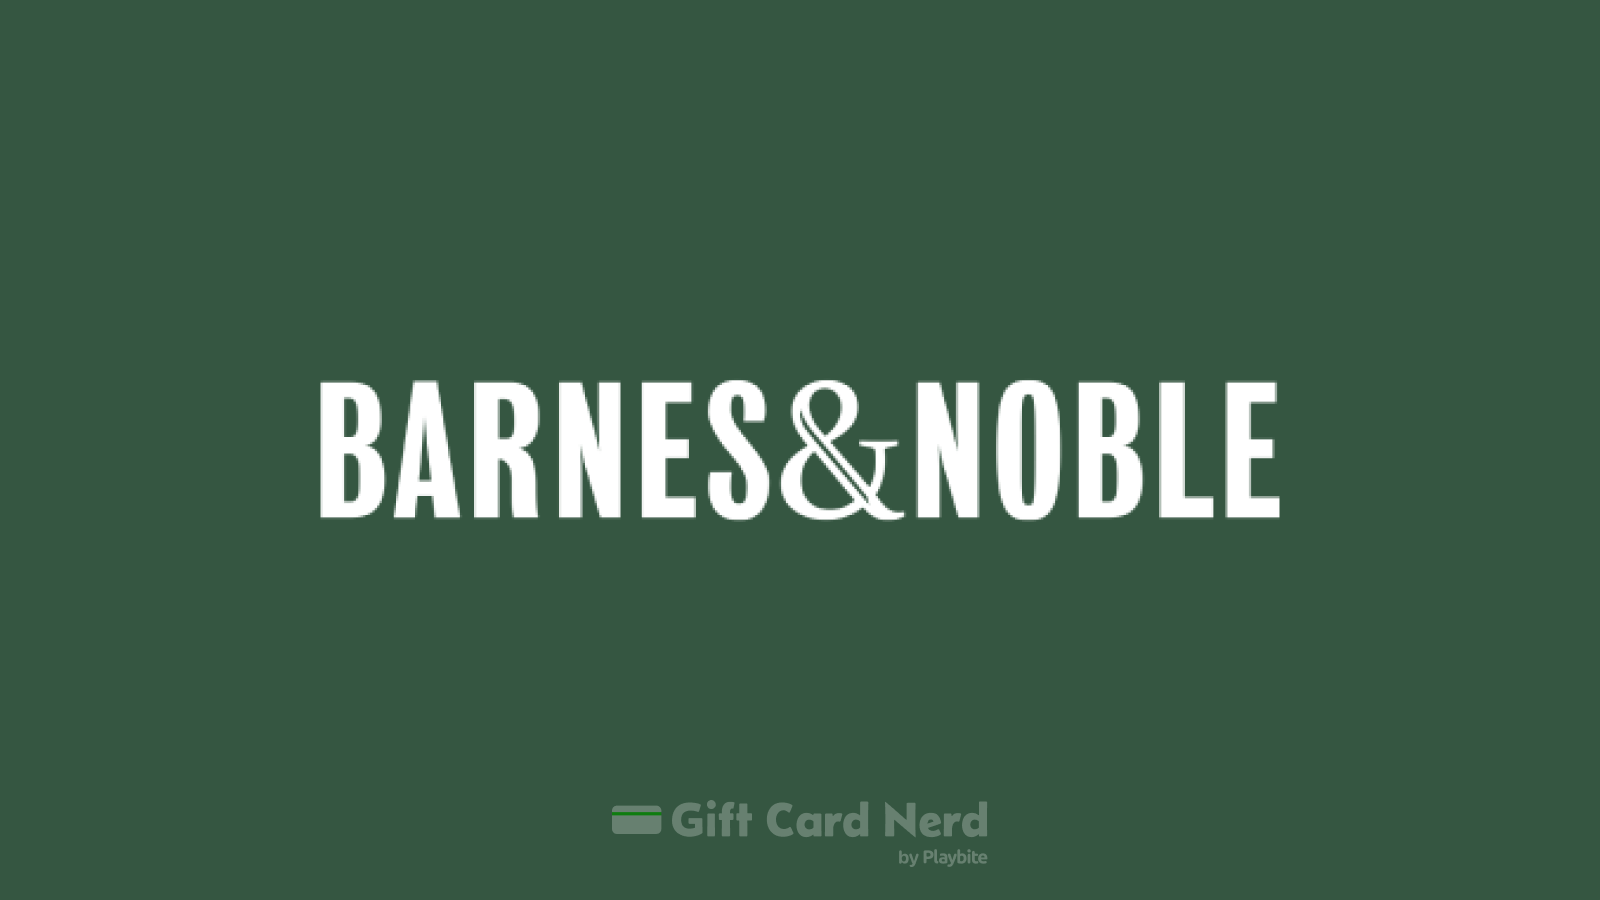 Can I Use a Barnes and Noble Gift Card on Grubhub?